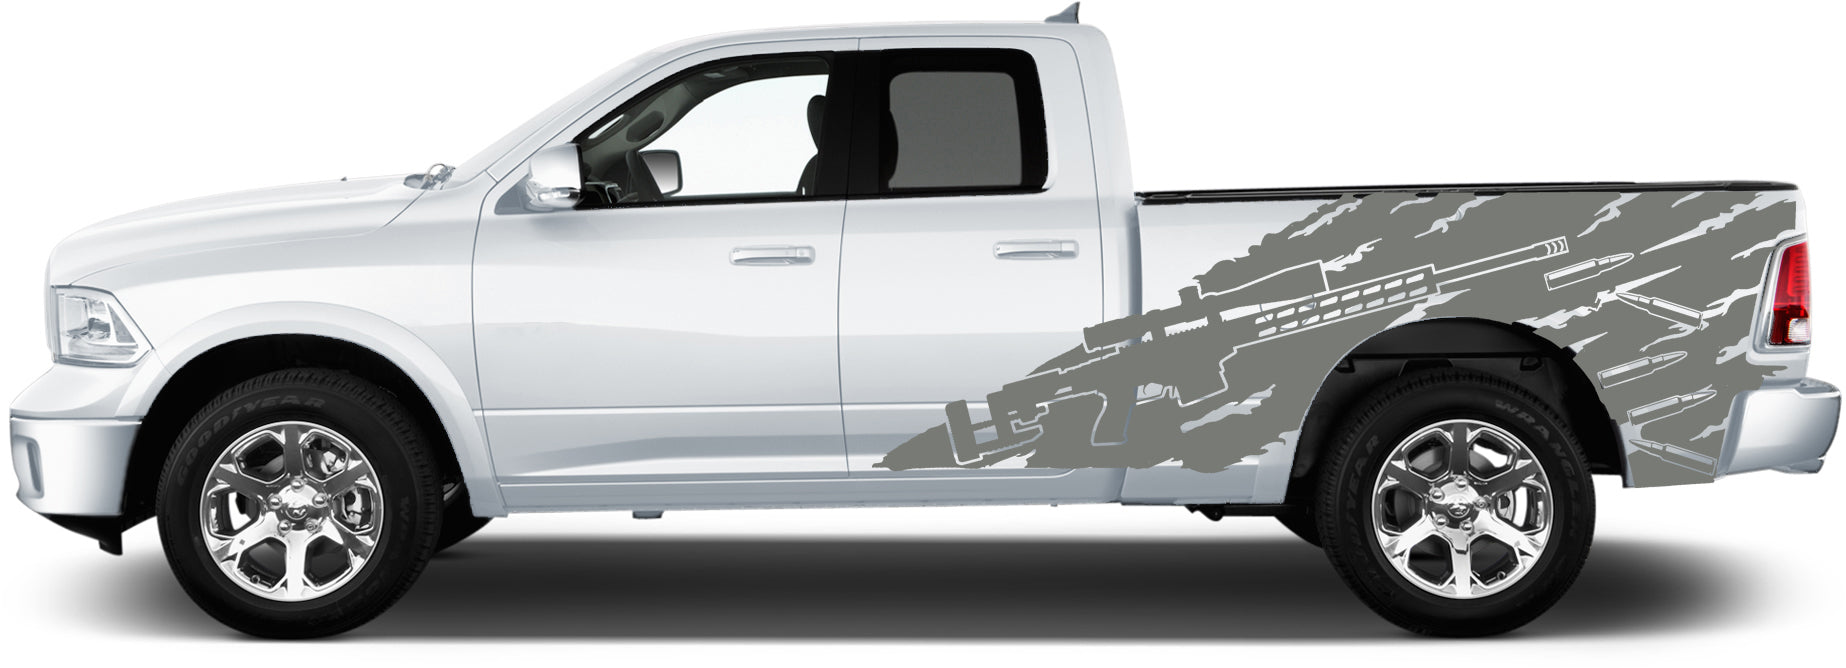 sniper side decal for dodge ram 2009 to 2018 models gray